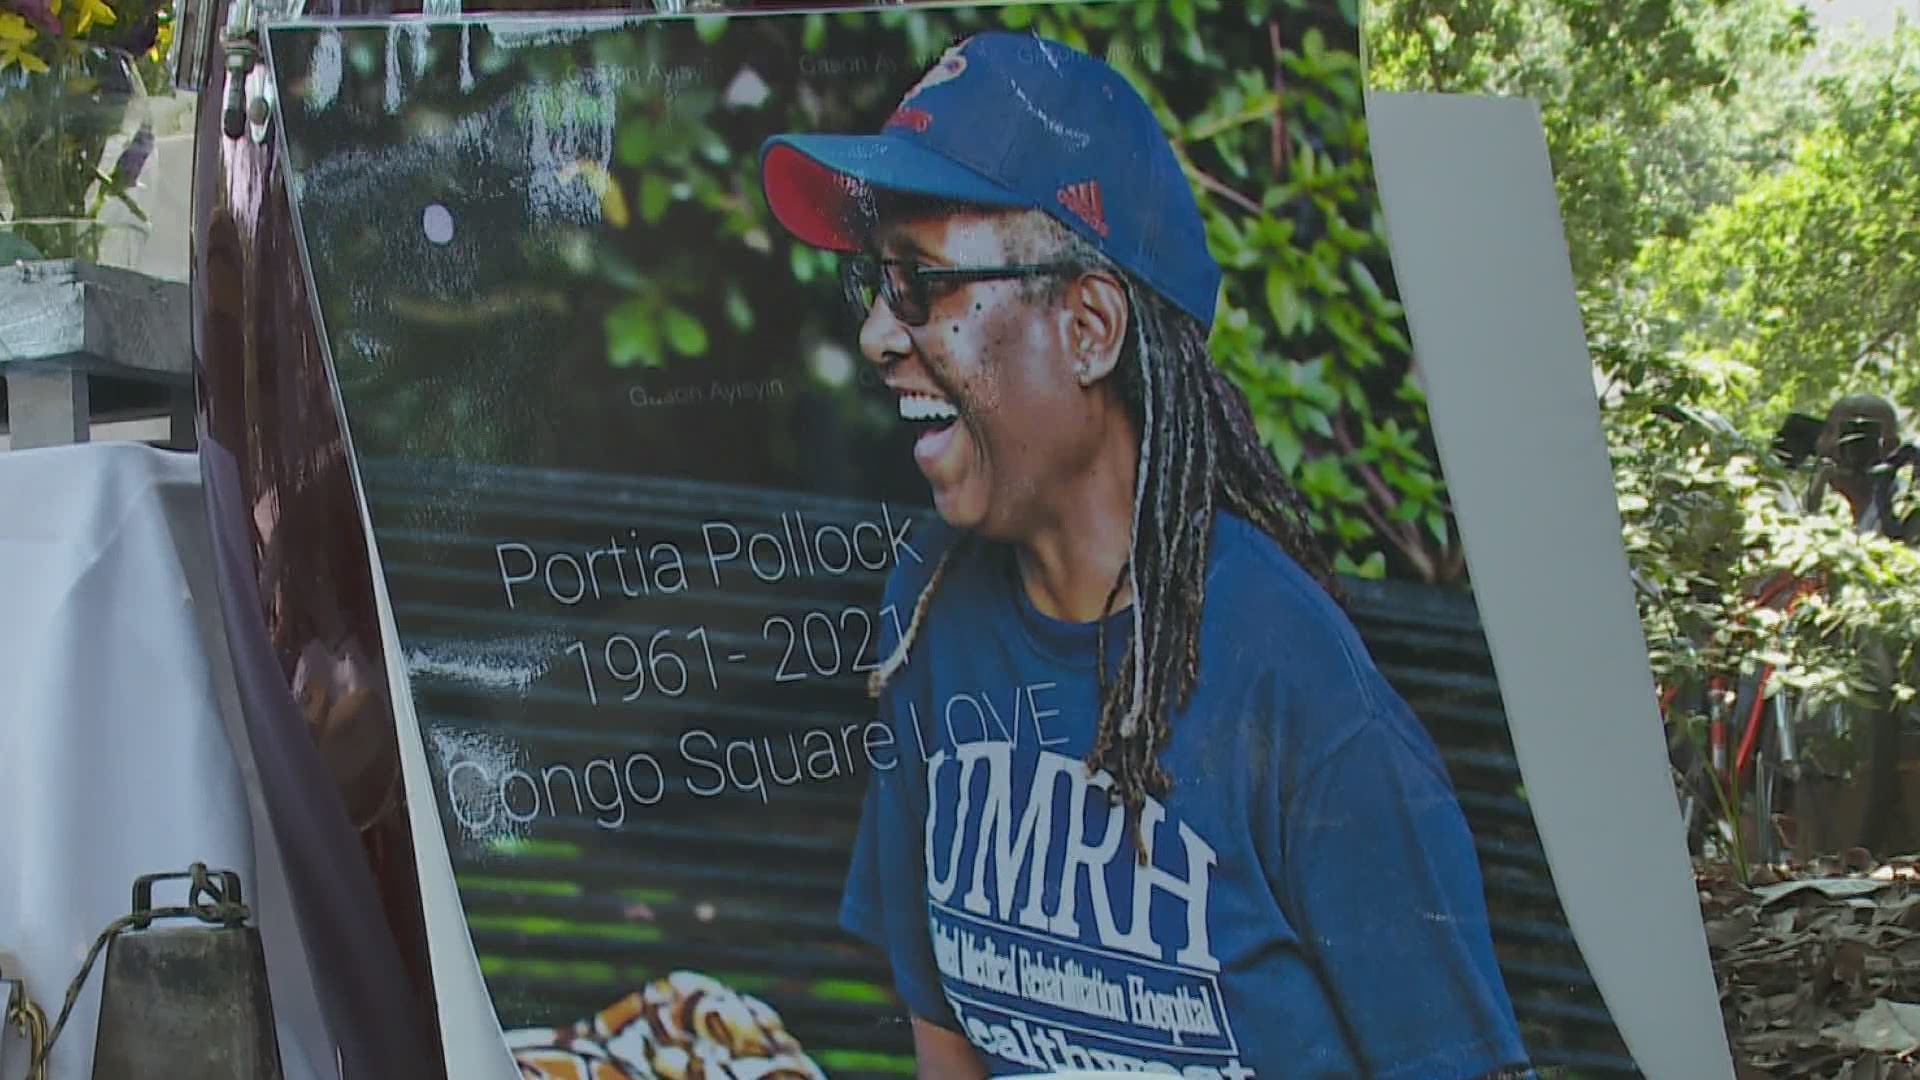 The community continues to celebrate the life of Portia Pollock who was killed in an armed carjacking a week ago.